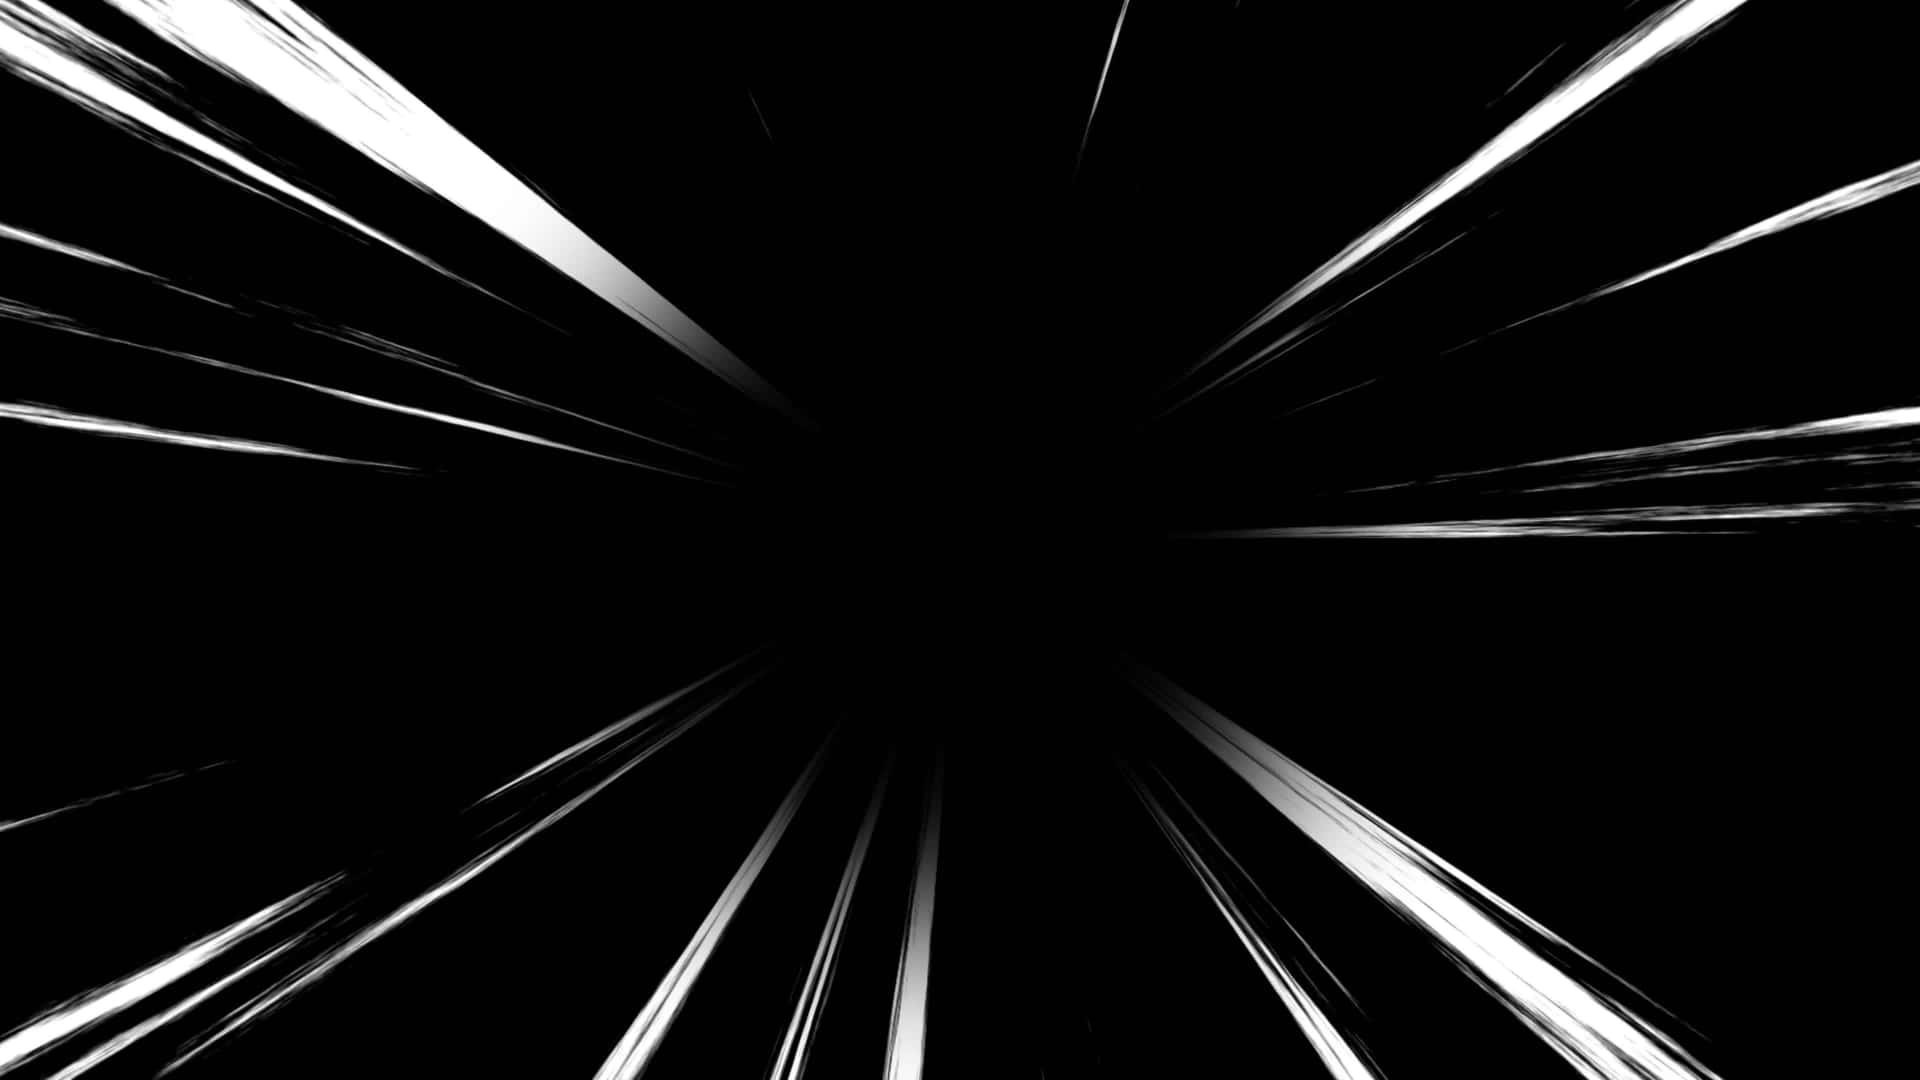 A Black And White Abstract Background With A Light Beam